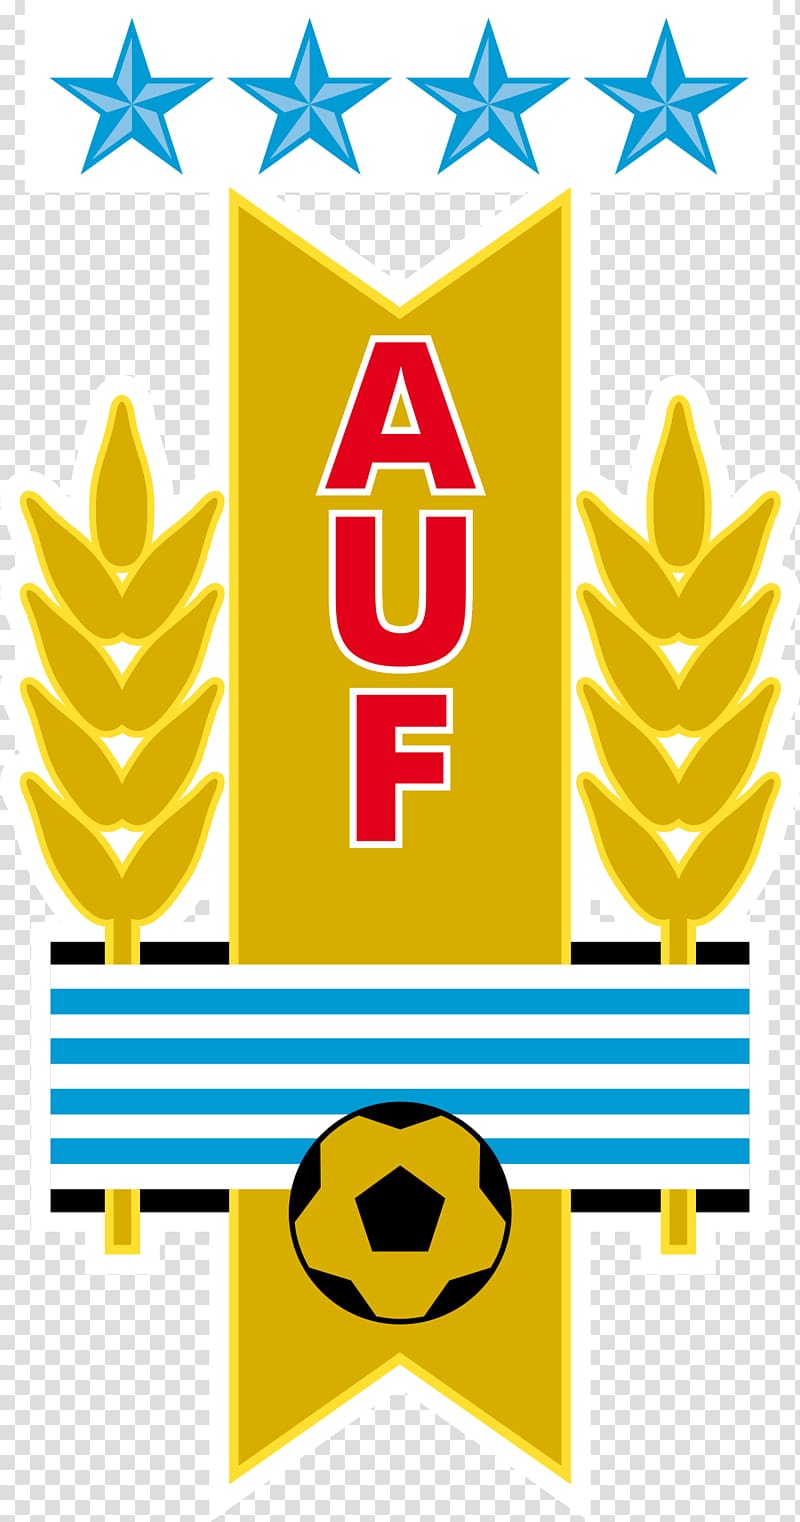 Uruguay national football team Brazil national football team Bolivia national football team World Cup, football transparent background PNG clipart